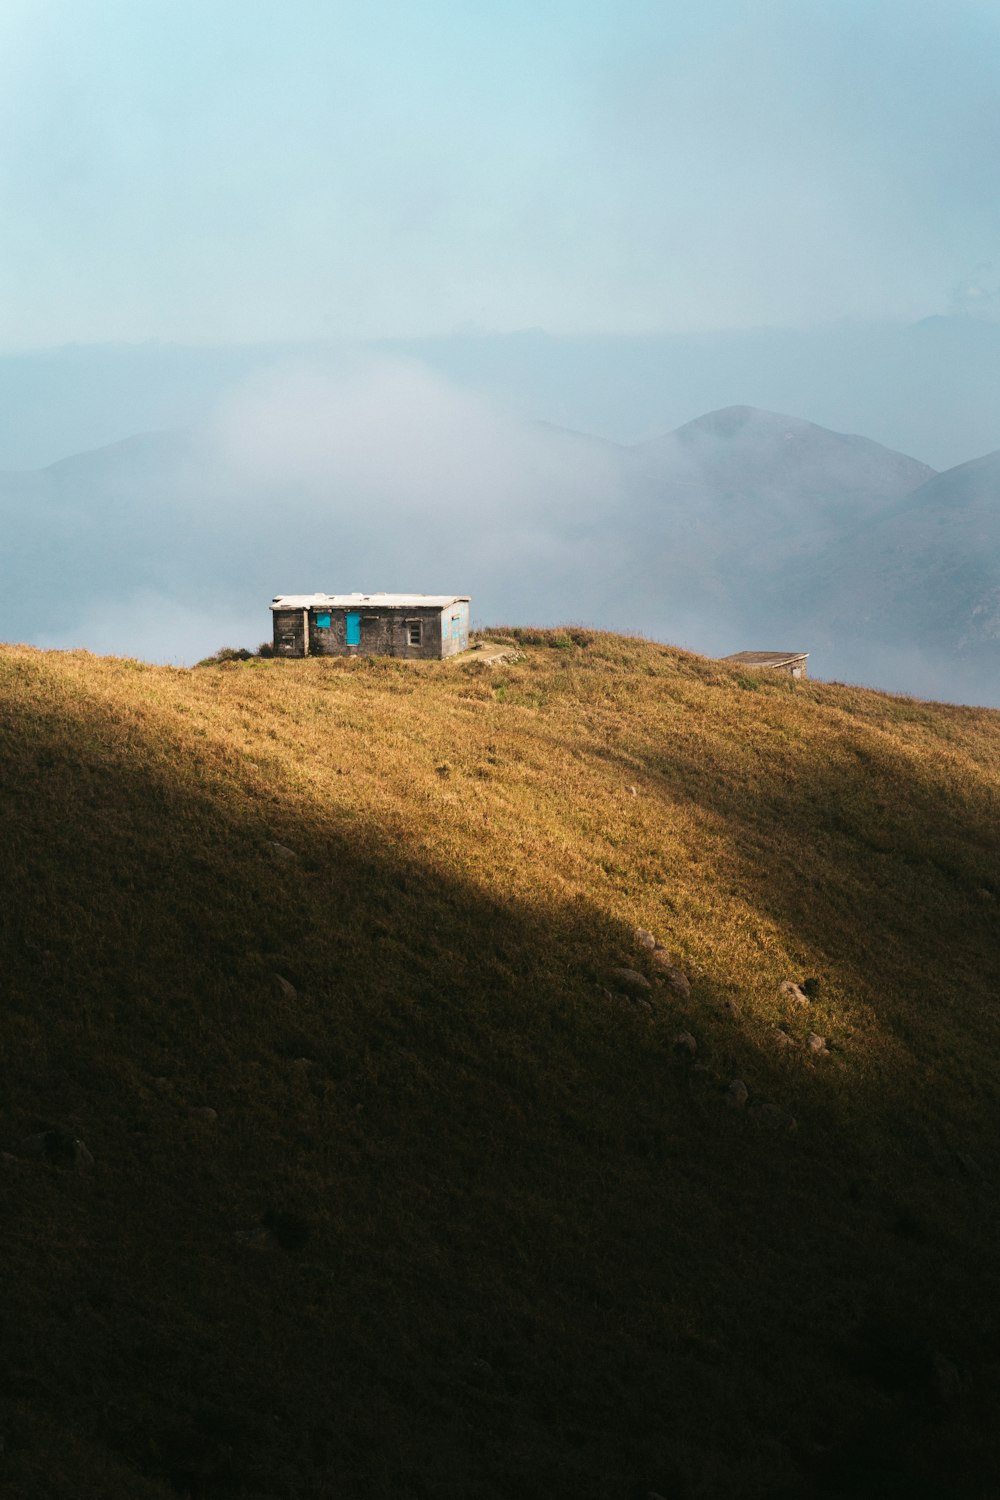 a small hut on a grassy hill with mountains in the background